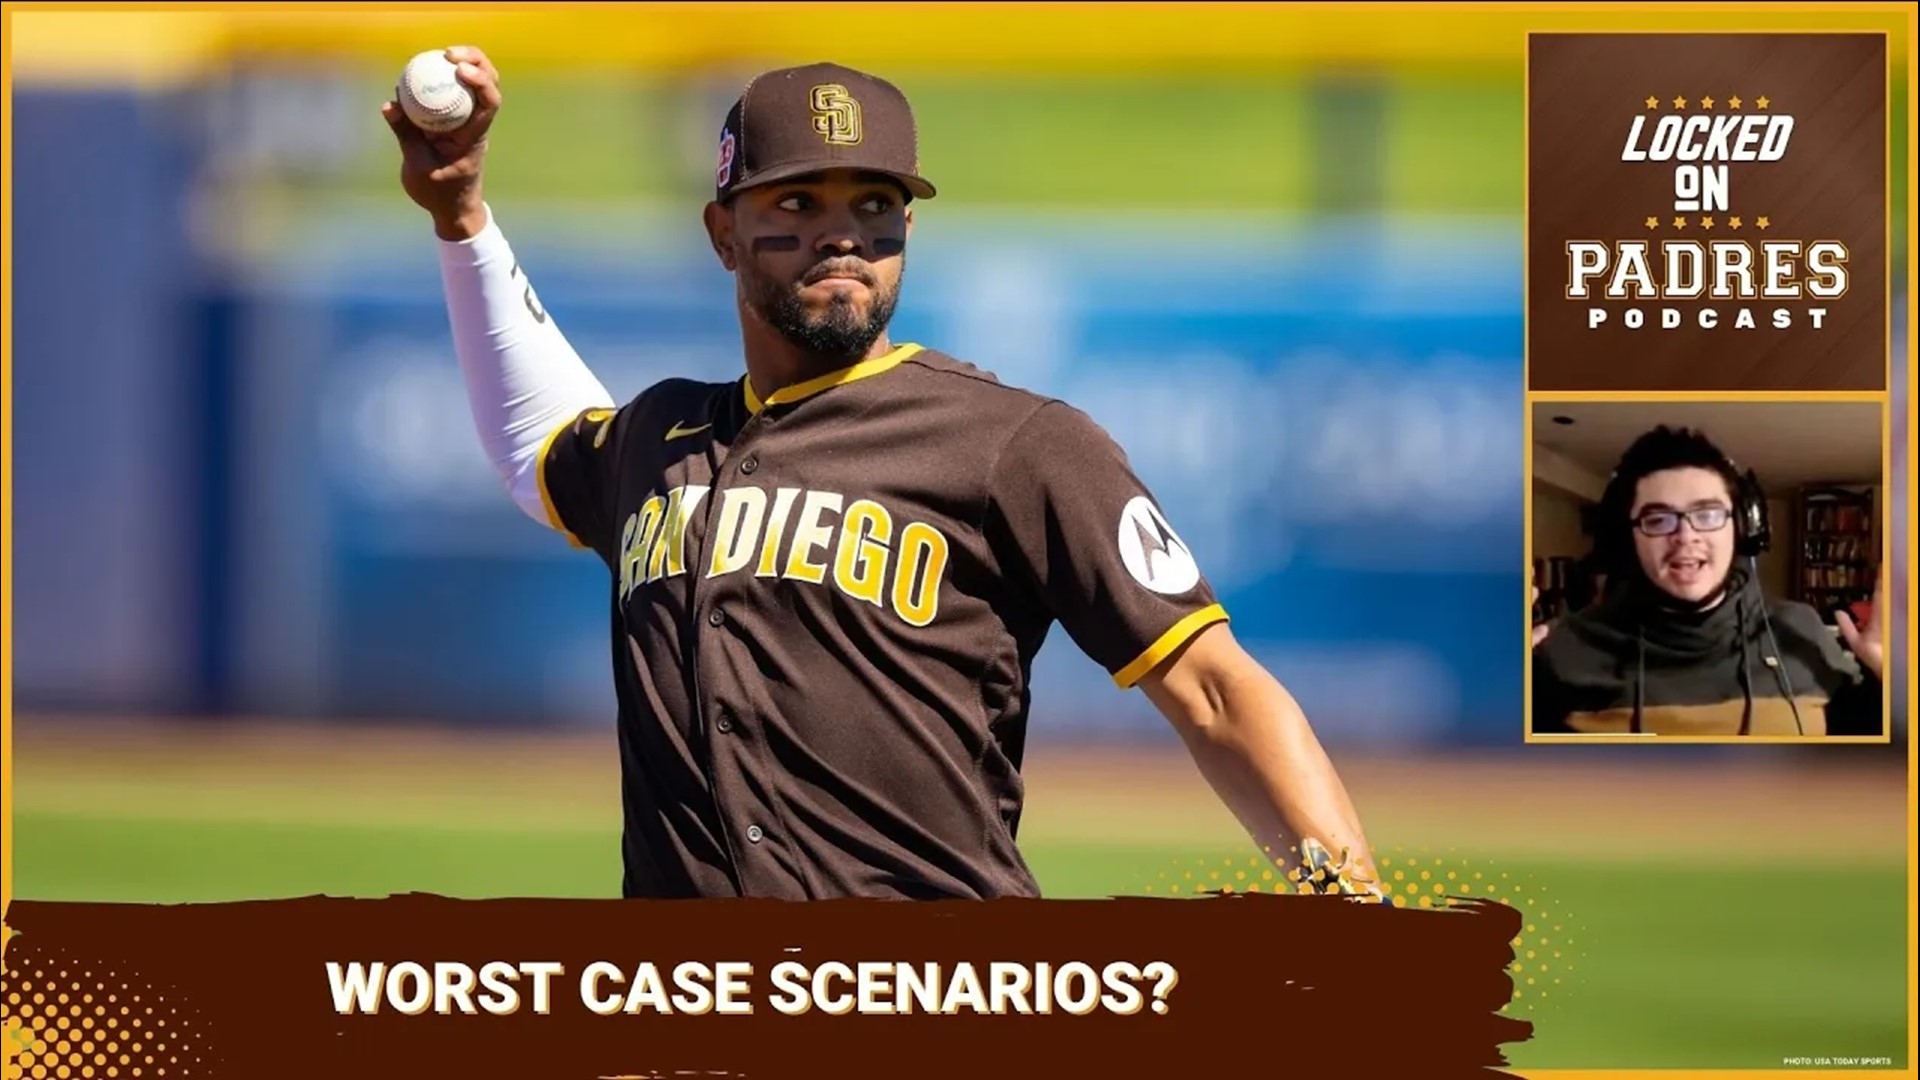 How could things go bad for the Padres? On today's episode, Javier discusses his 5 greatest potential fears for how the 2023 Padres team could be a disappointment.